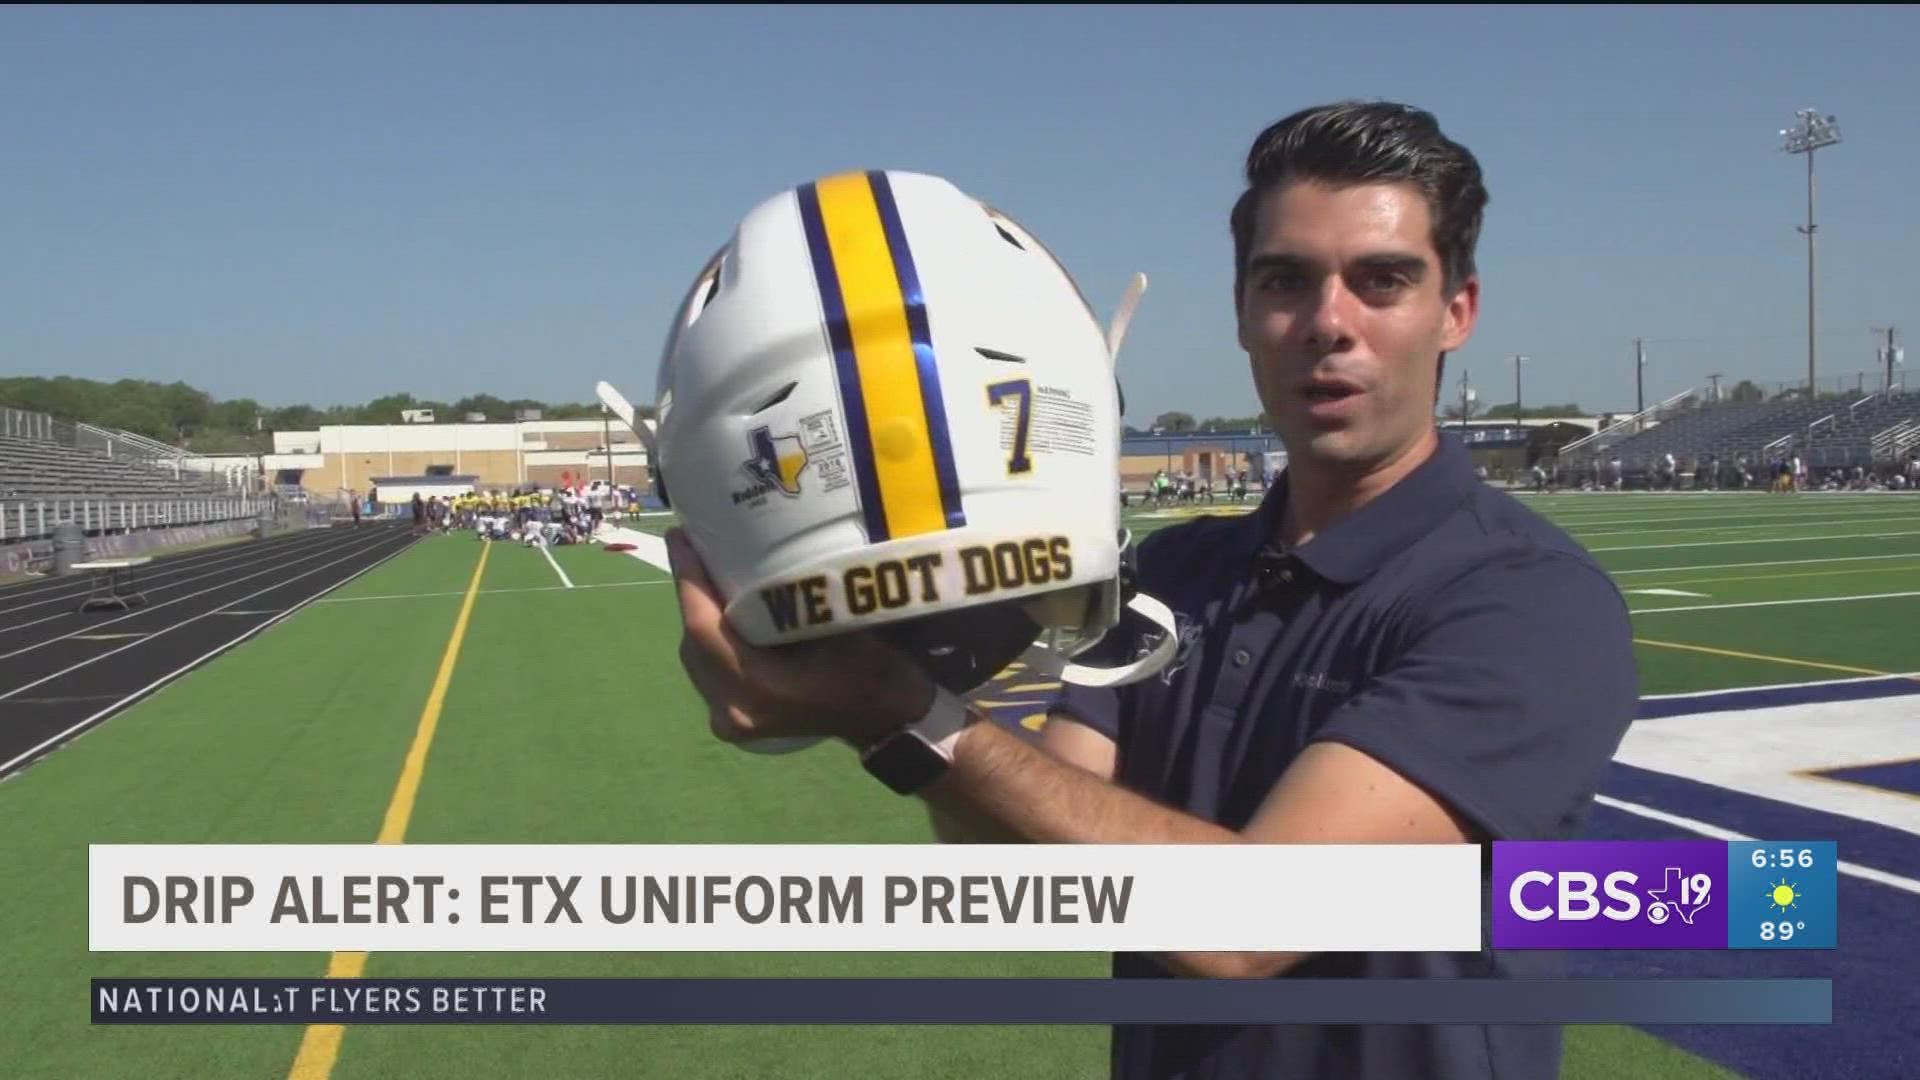 CBS19's Bryce Brauneisen checked out a couple of the best uniform combos in East Texas ahead of the season.